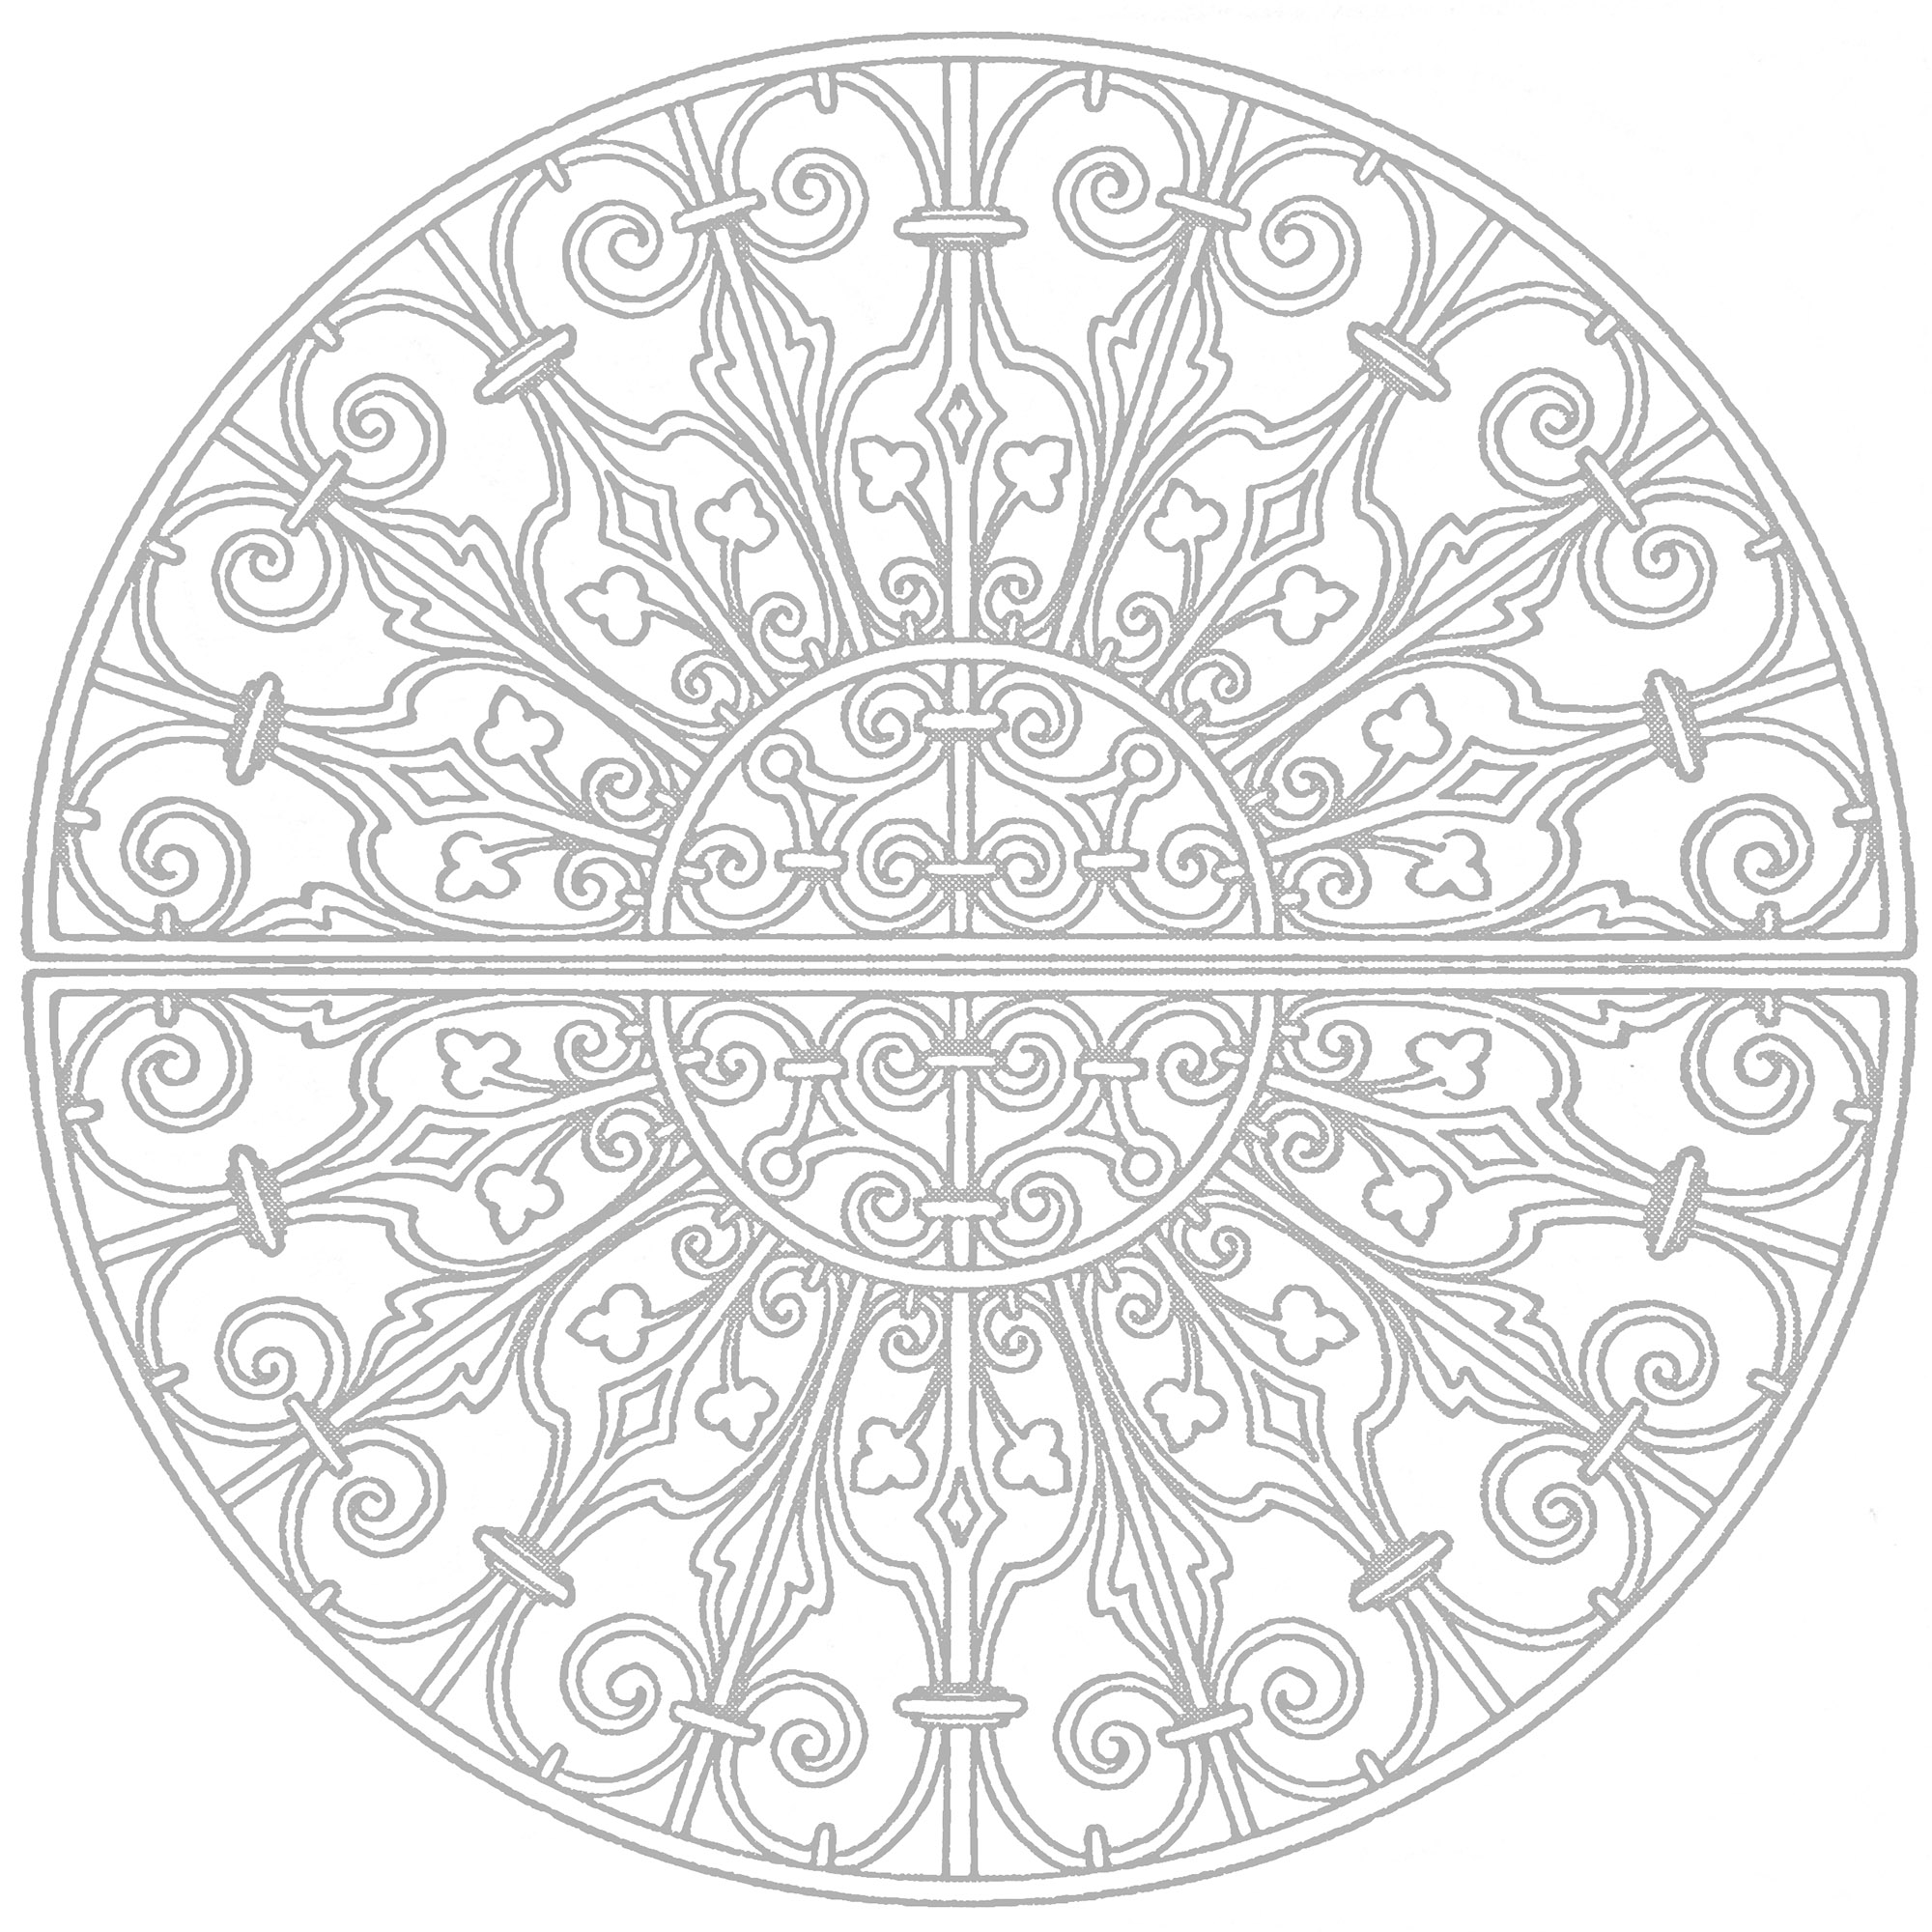 A majestic azulejo. The lines of this coloring page created from an azulejo have been grayed out for a soft coloring effect ... With pastel colors, it'll be perfect